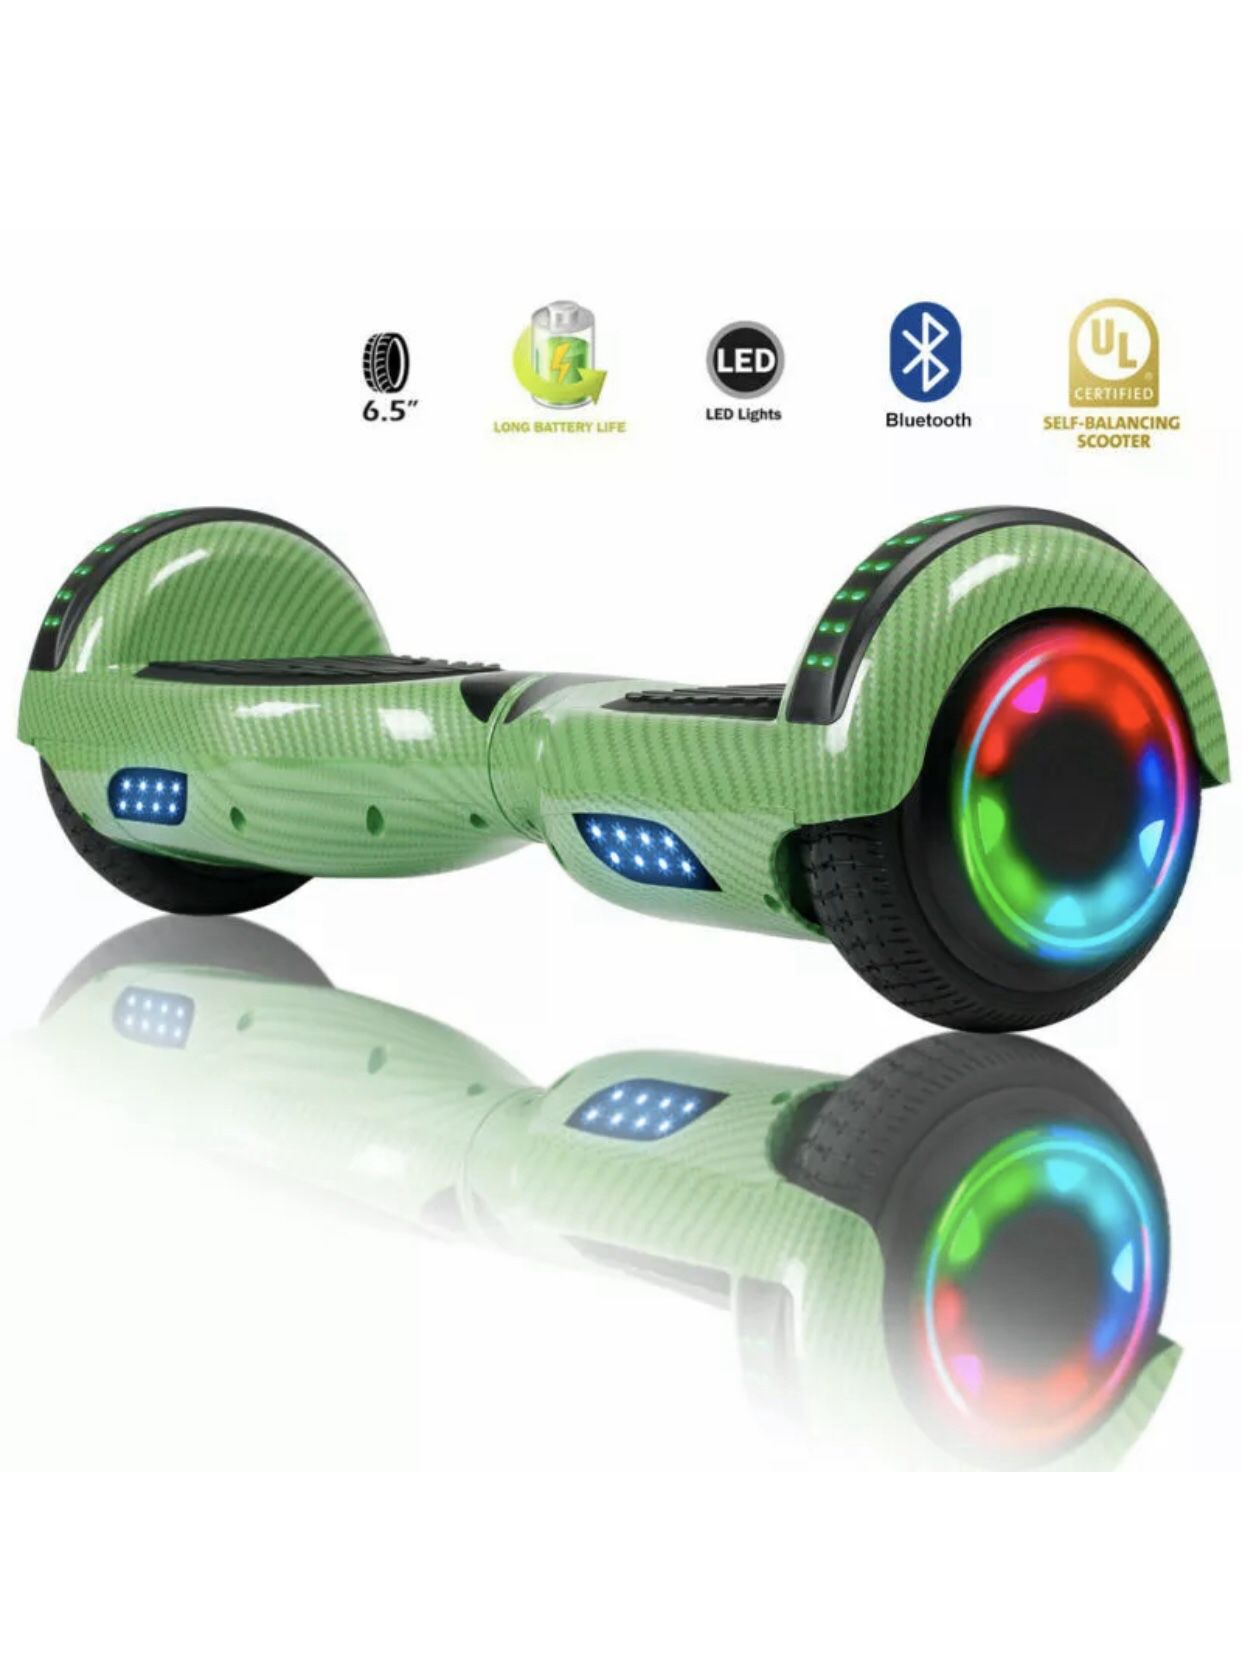 Bluetooth Hoverboard 6.5" 2Wheel Self Balancing Scooter